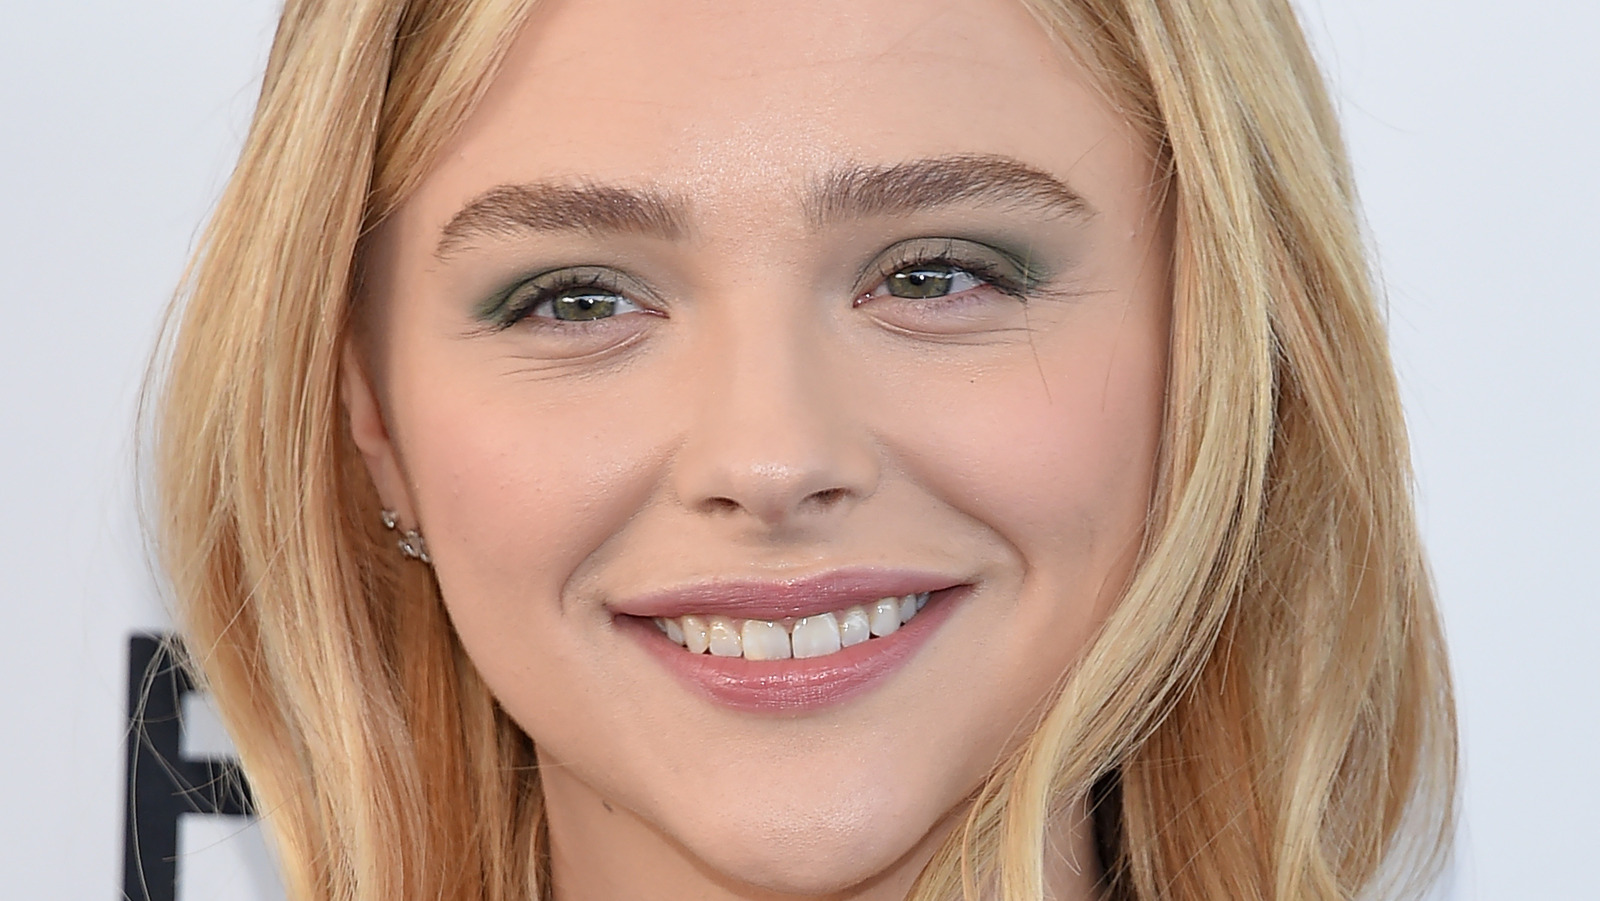 Chloe Grace Moretz Uses This Cooking Ingredient to Wash Her Face